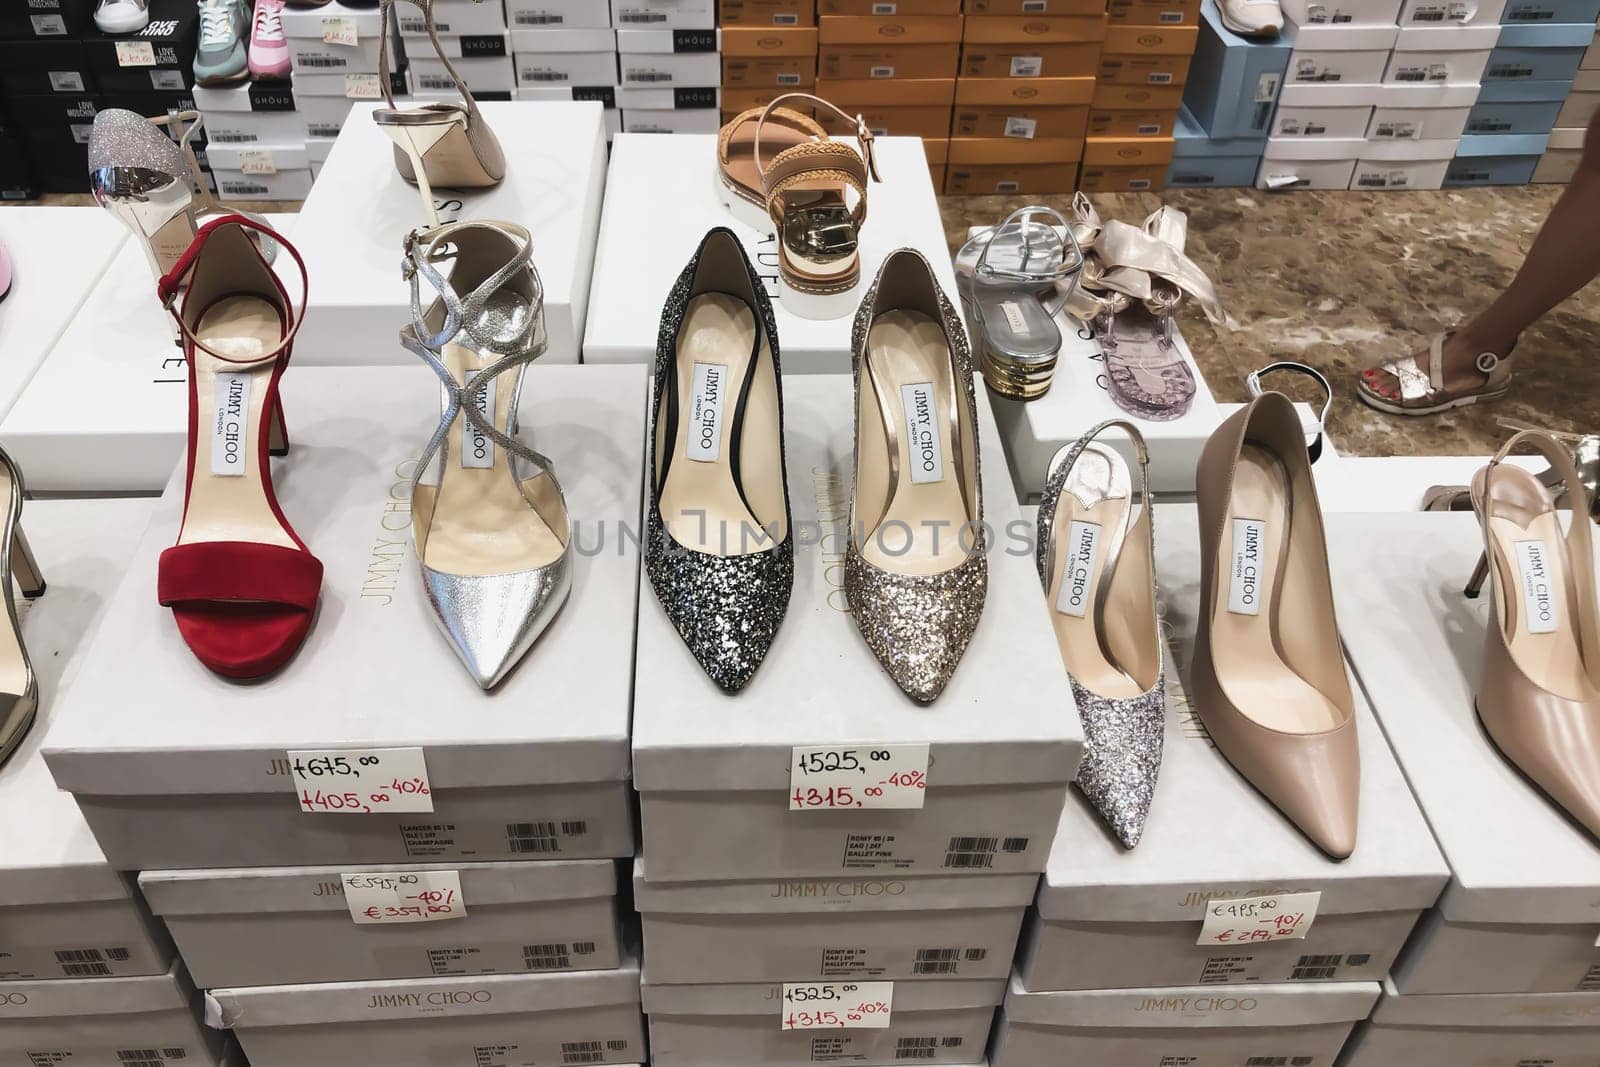 VERONA, ITALY- AUGUST 19, 2019: Jimmy Choo shoes in store with discounts on sale